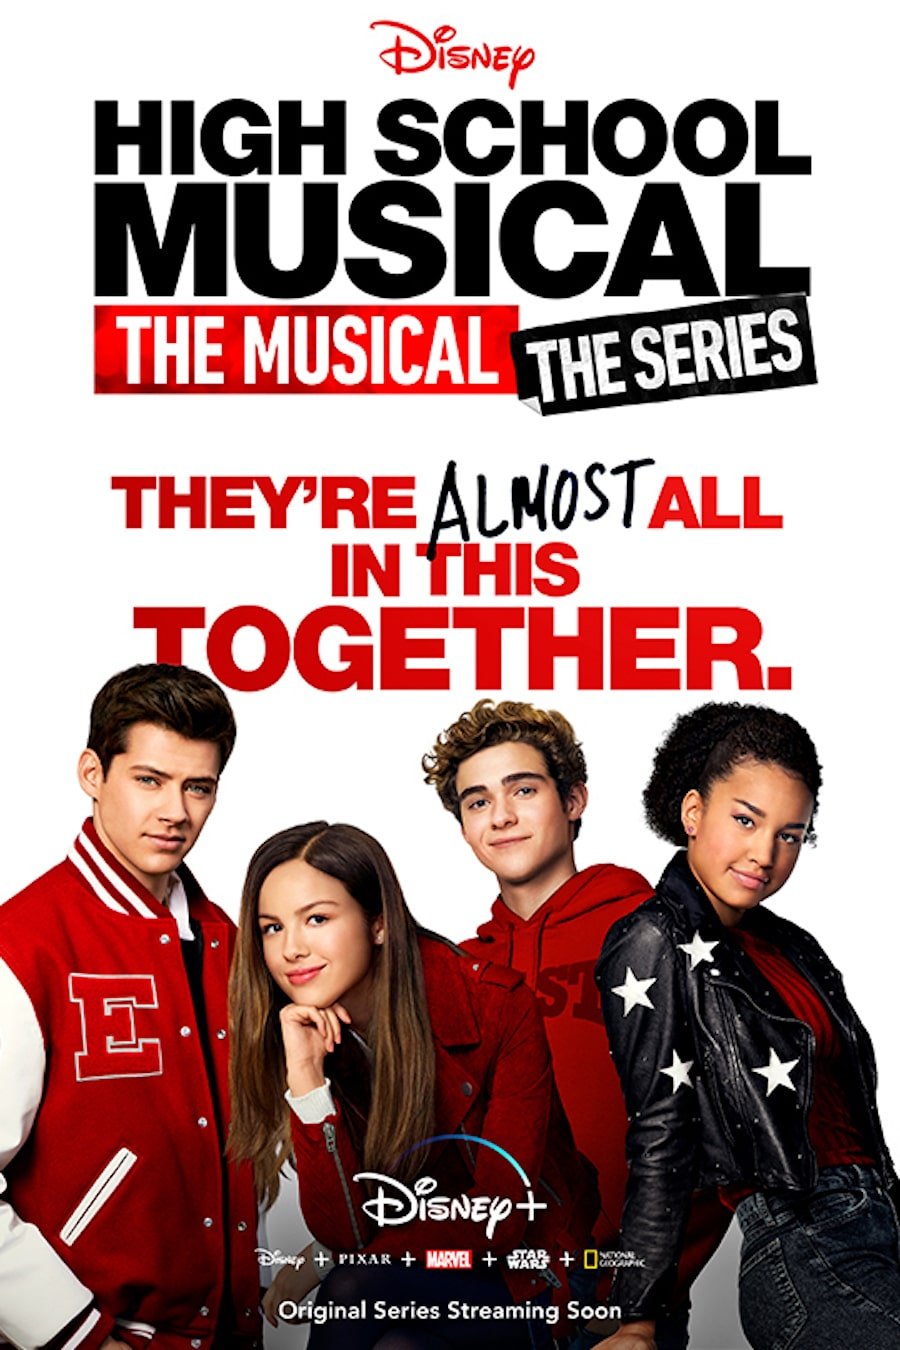 HSM the series